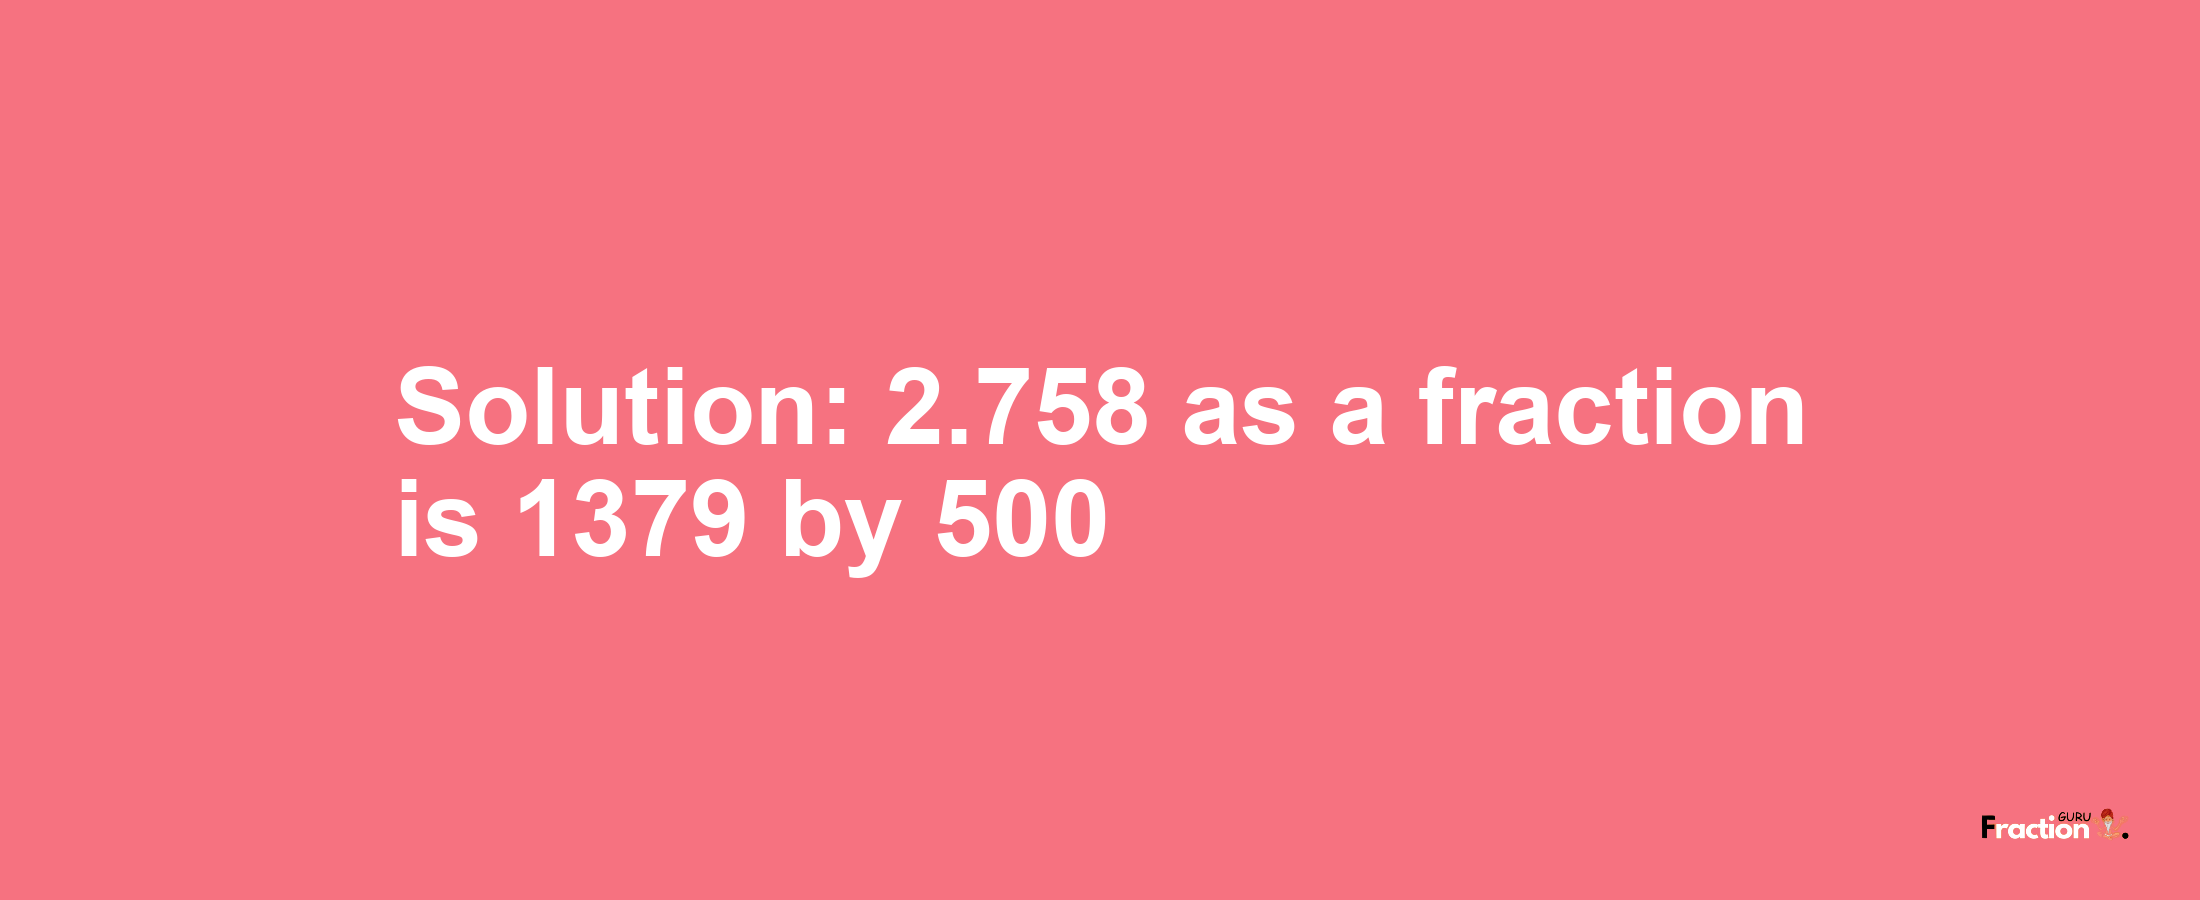 Solution:2.758 as a fraction is 1379/500